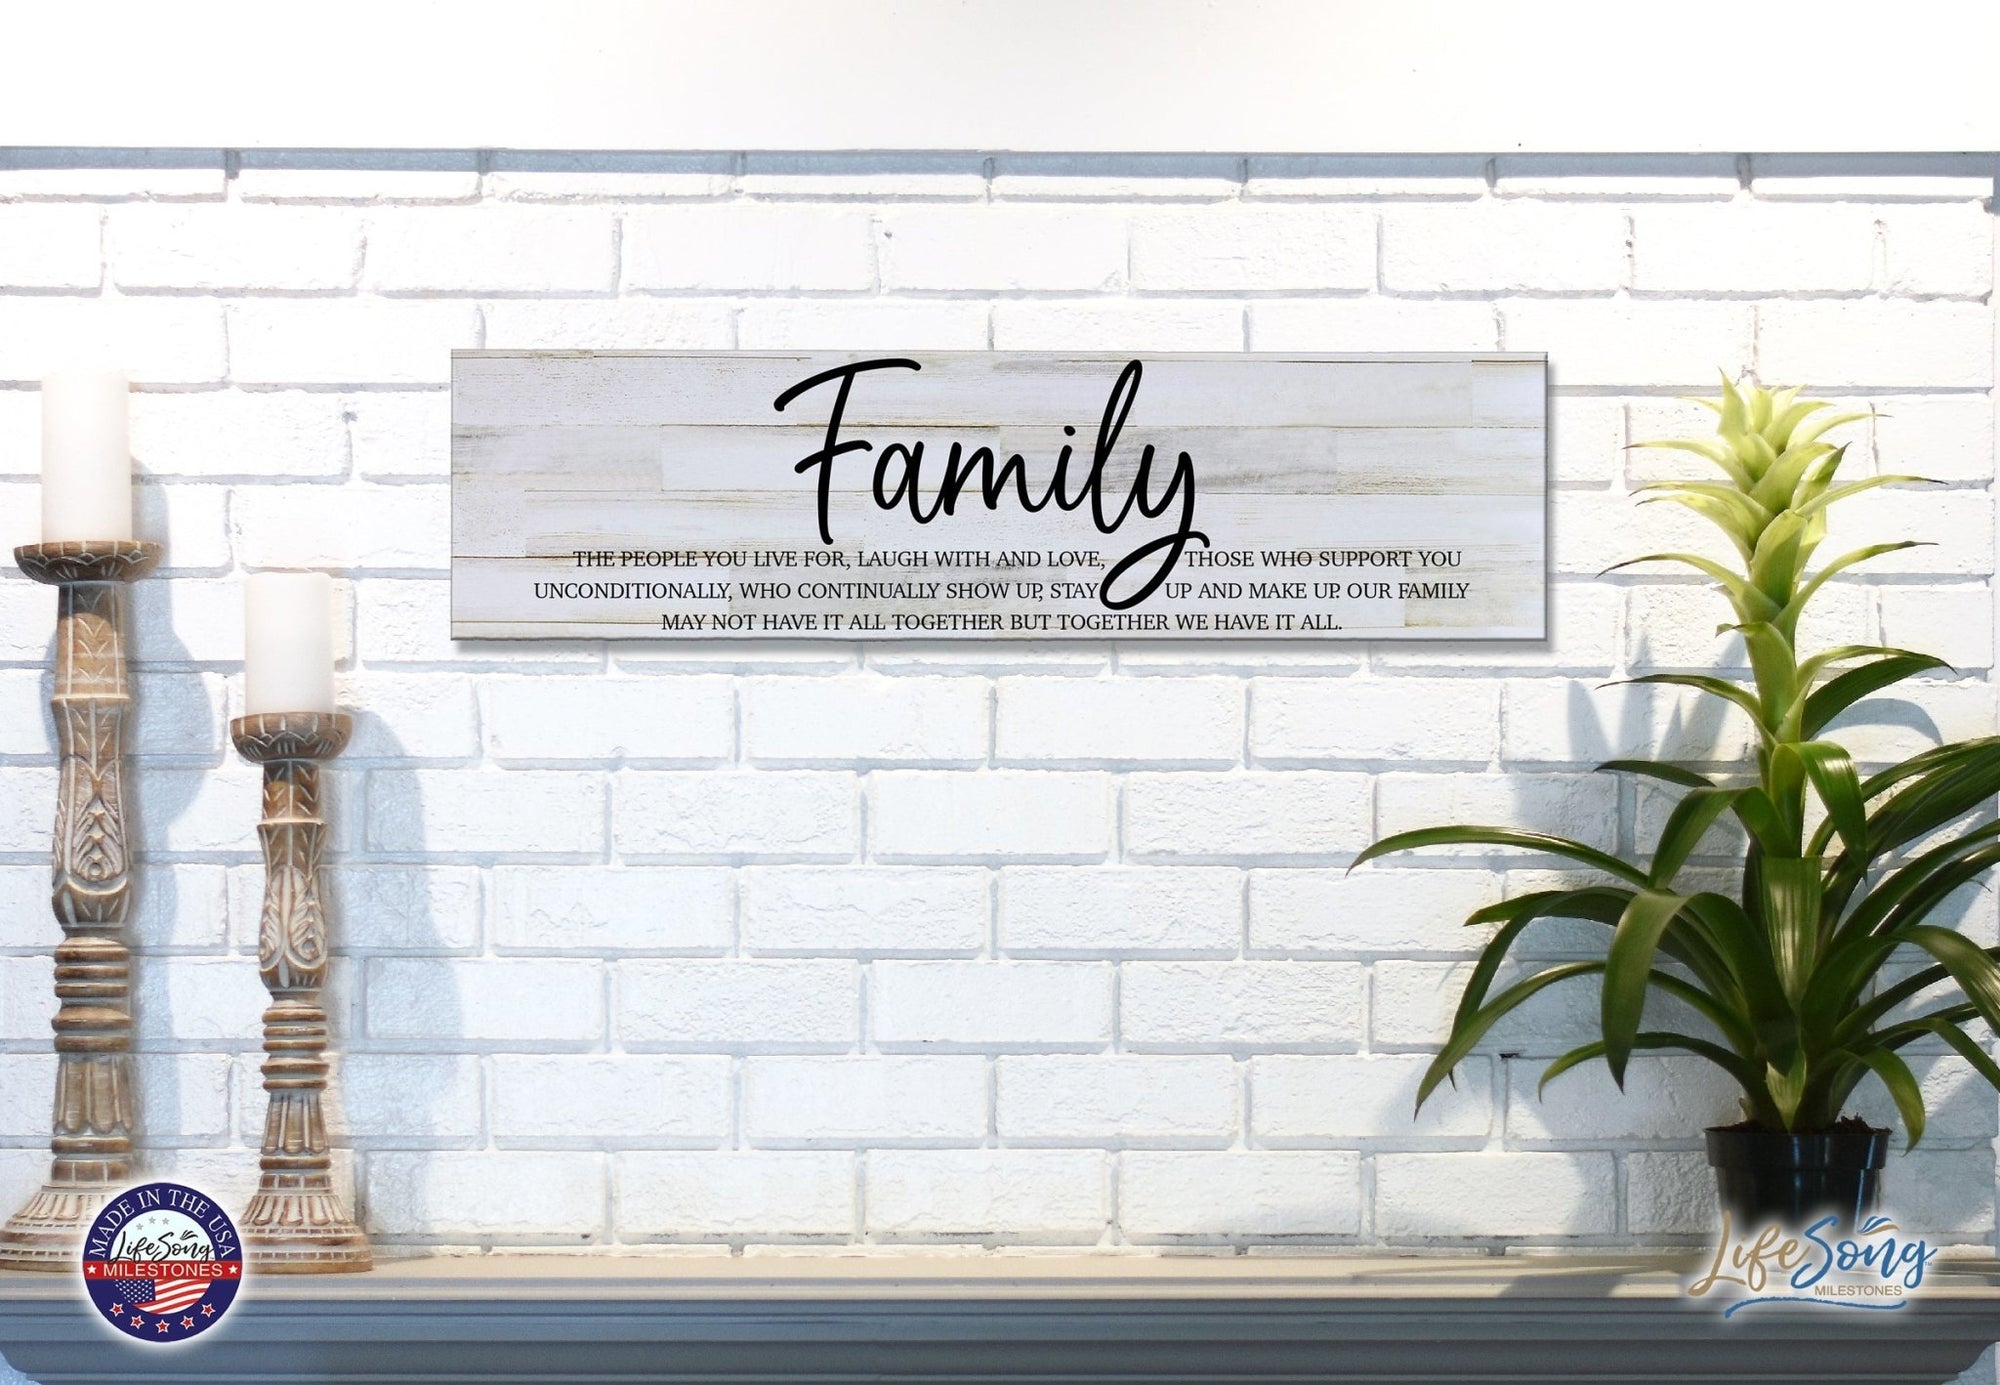 Inspirational Modern Wooden Wall Hanging Plaque 10x40 - The People You Live For - LifeSong Milestones